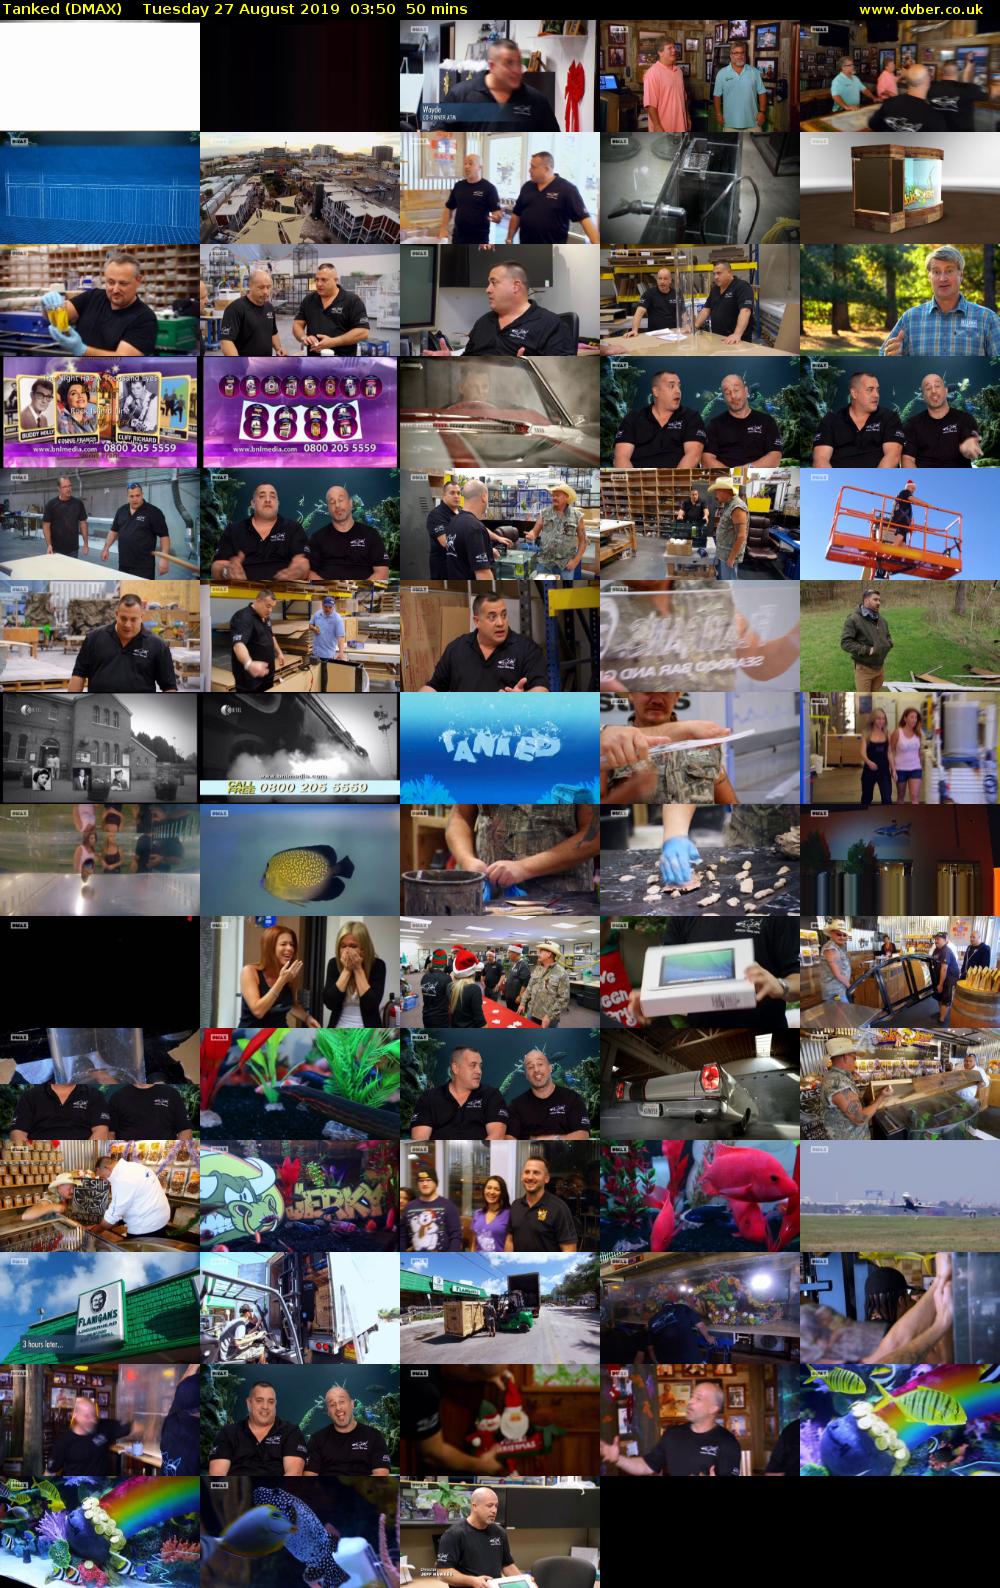 Tanked (DMAX) Tuesday 27 August 2019 03:50 - 04:40